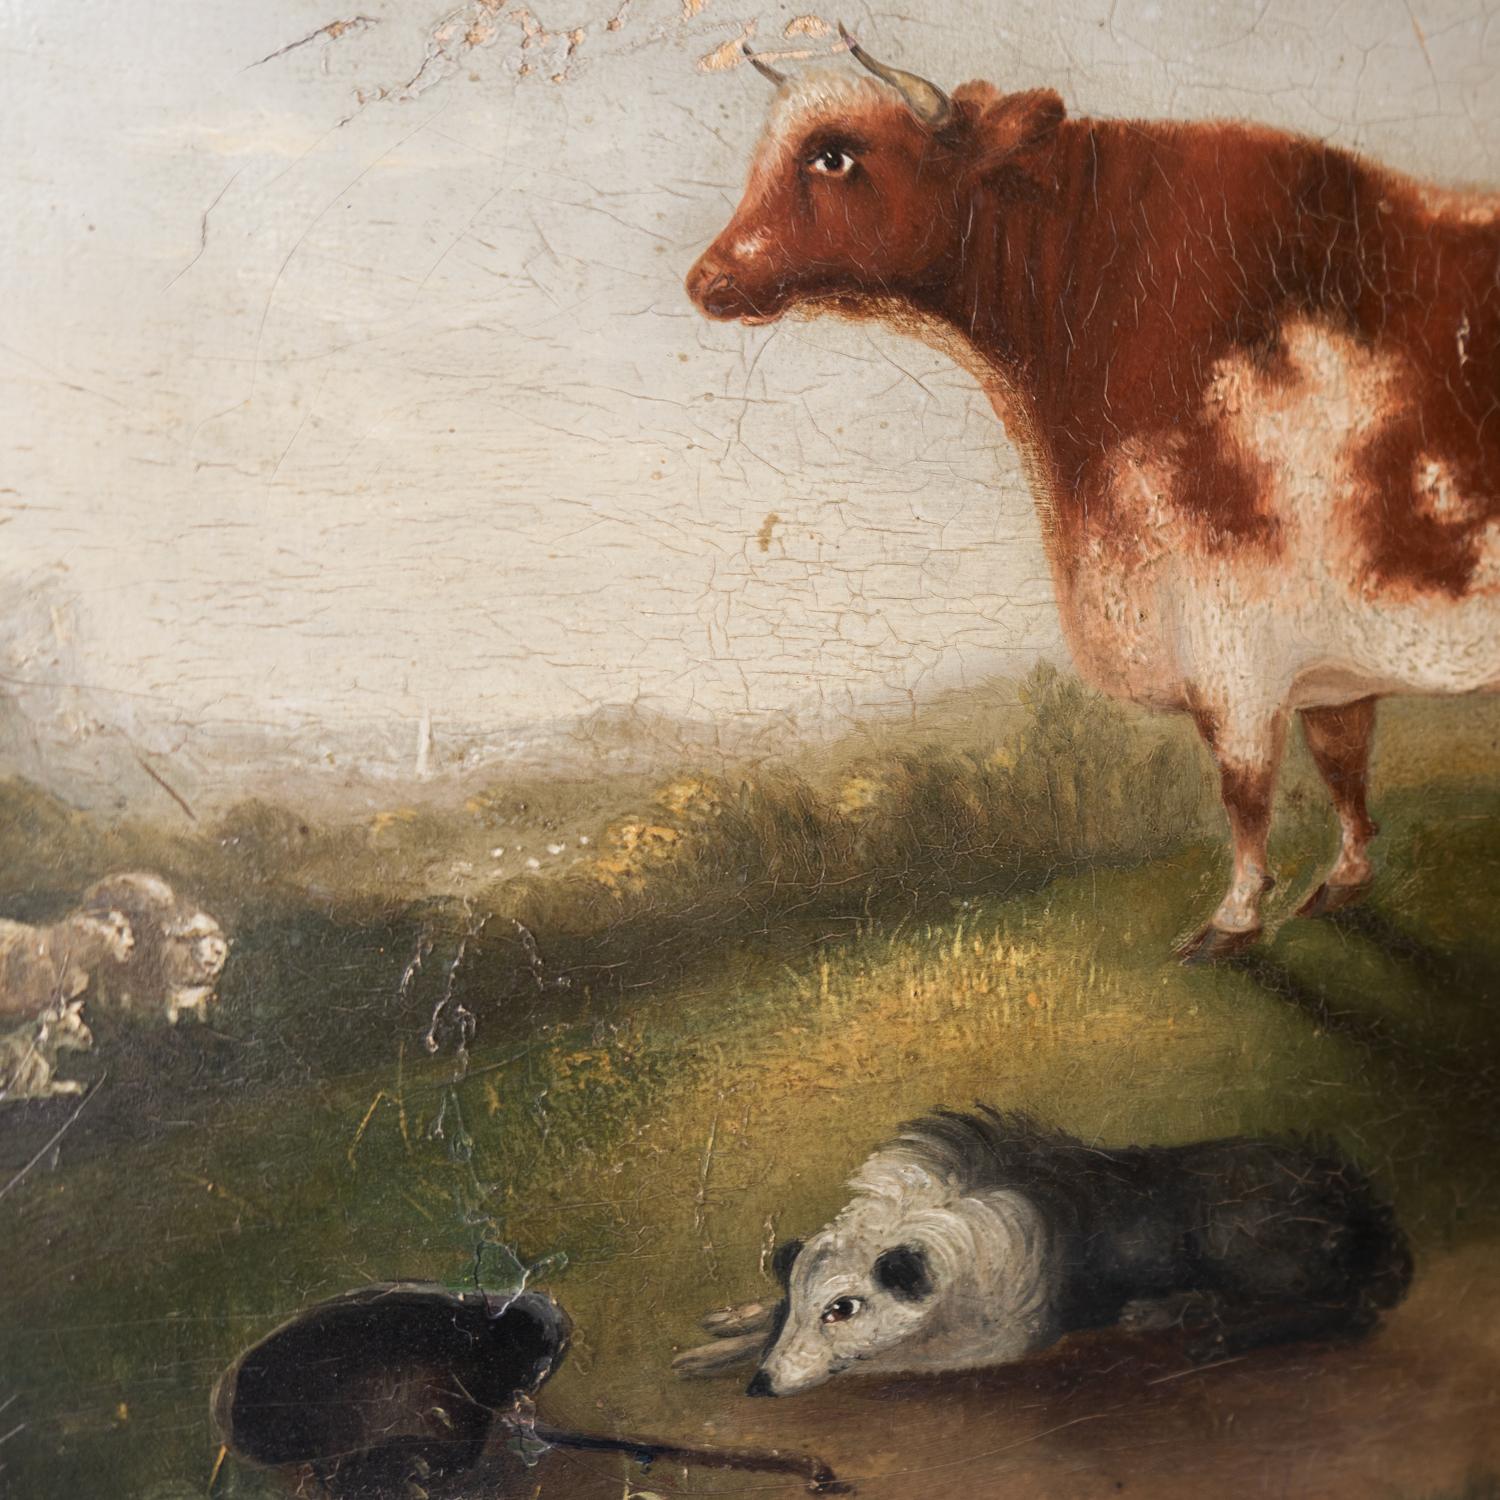 Wood Naive Folk Art Depiction of Cattle, Sheep & Sheepdog, Antique Oil Painting